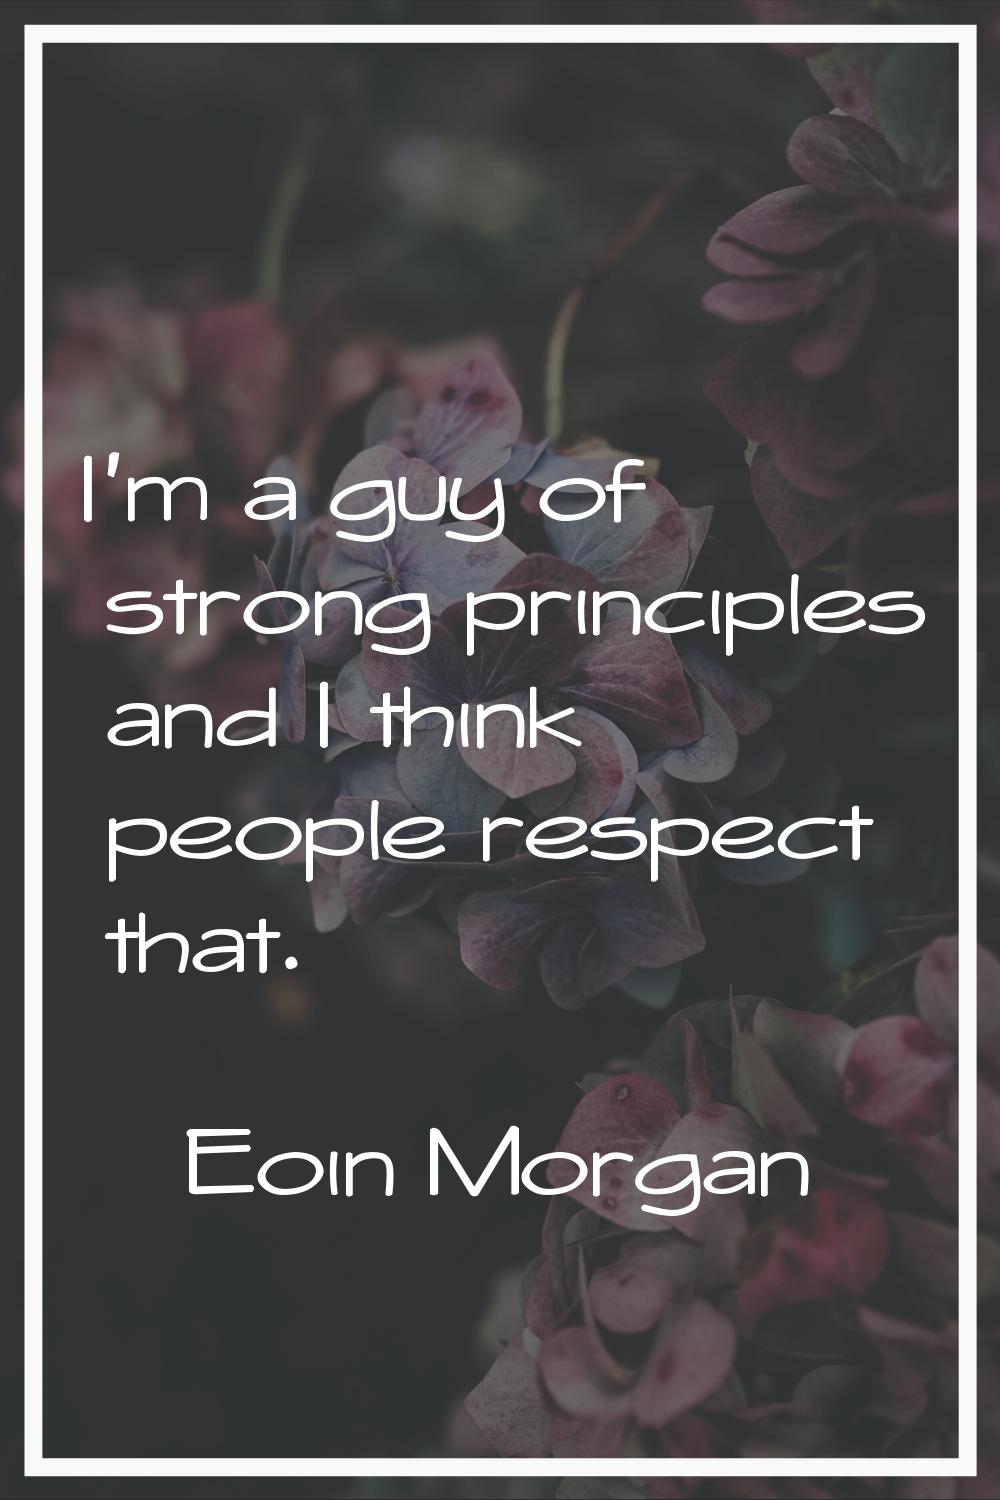 I'm a guy of strong principles and I think people respect that.